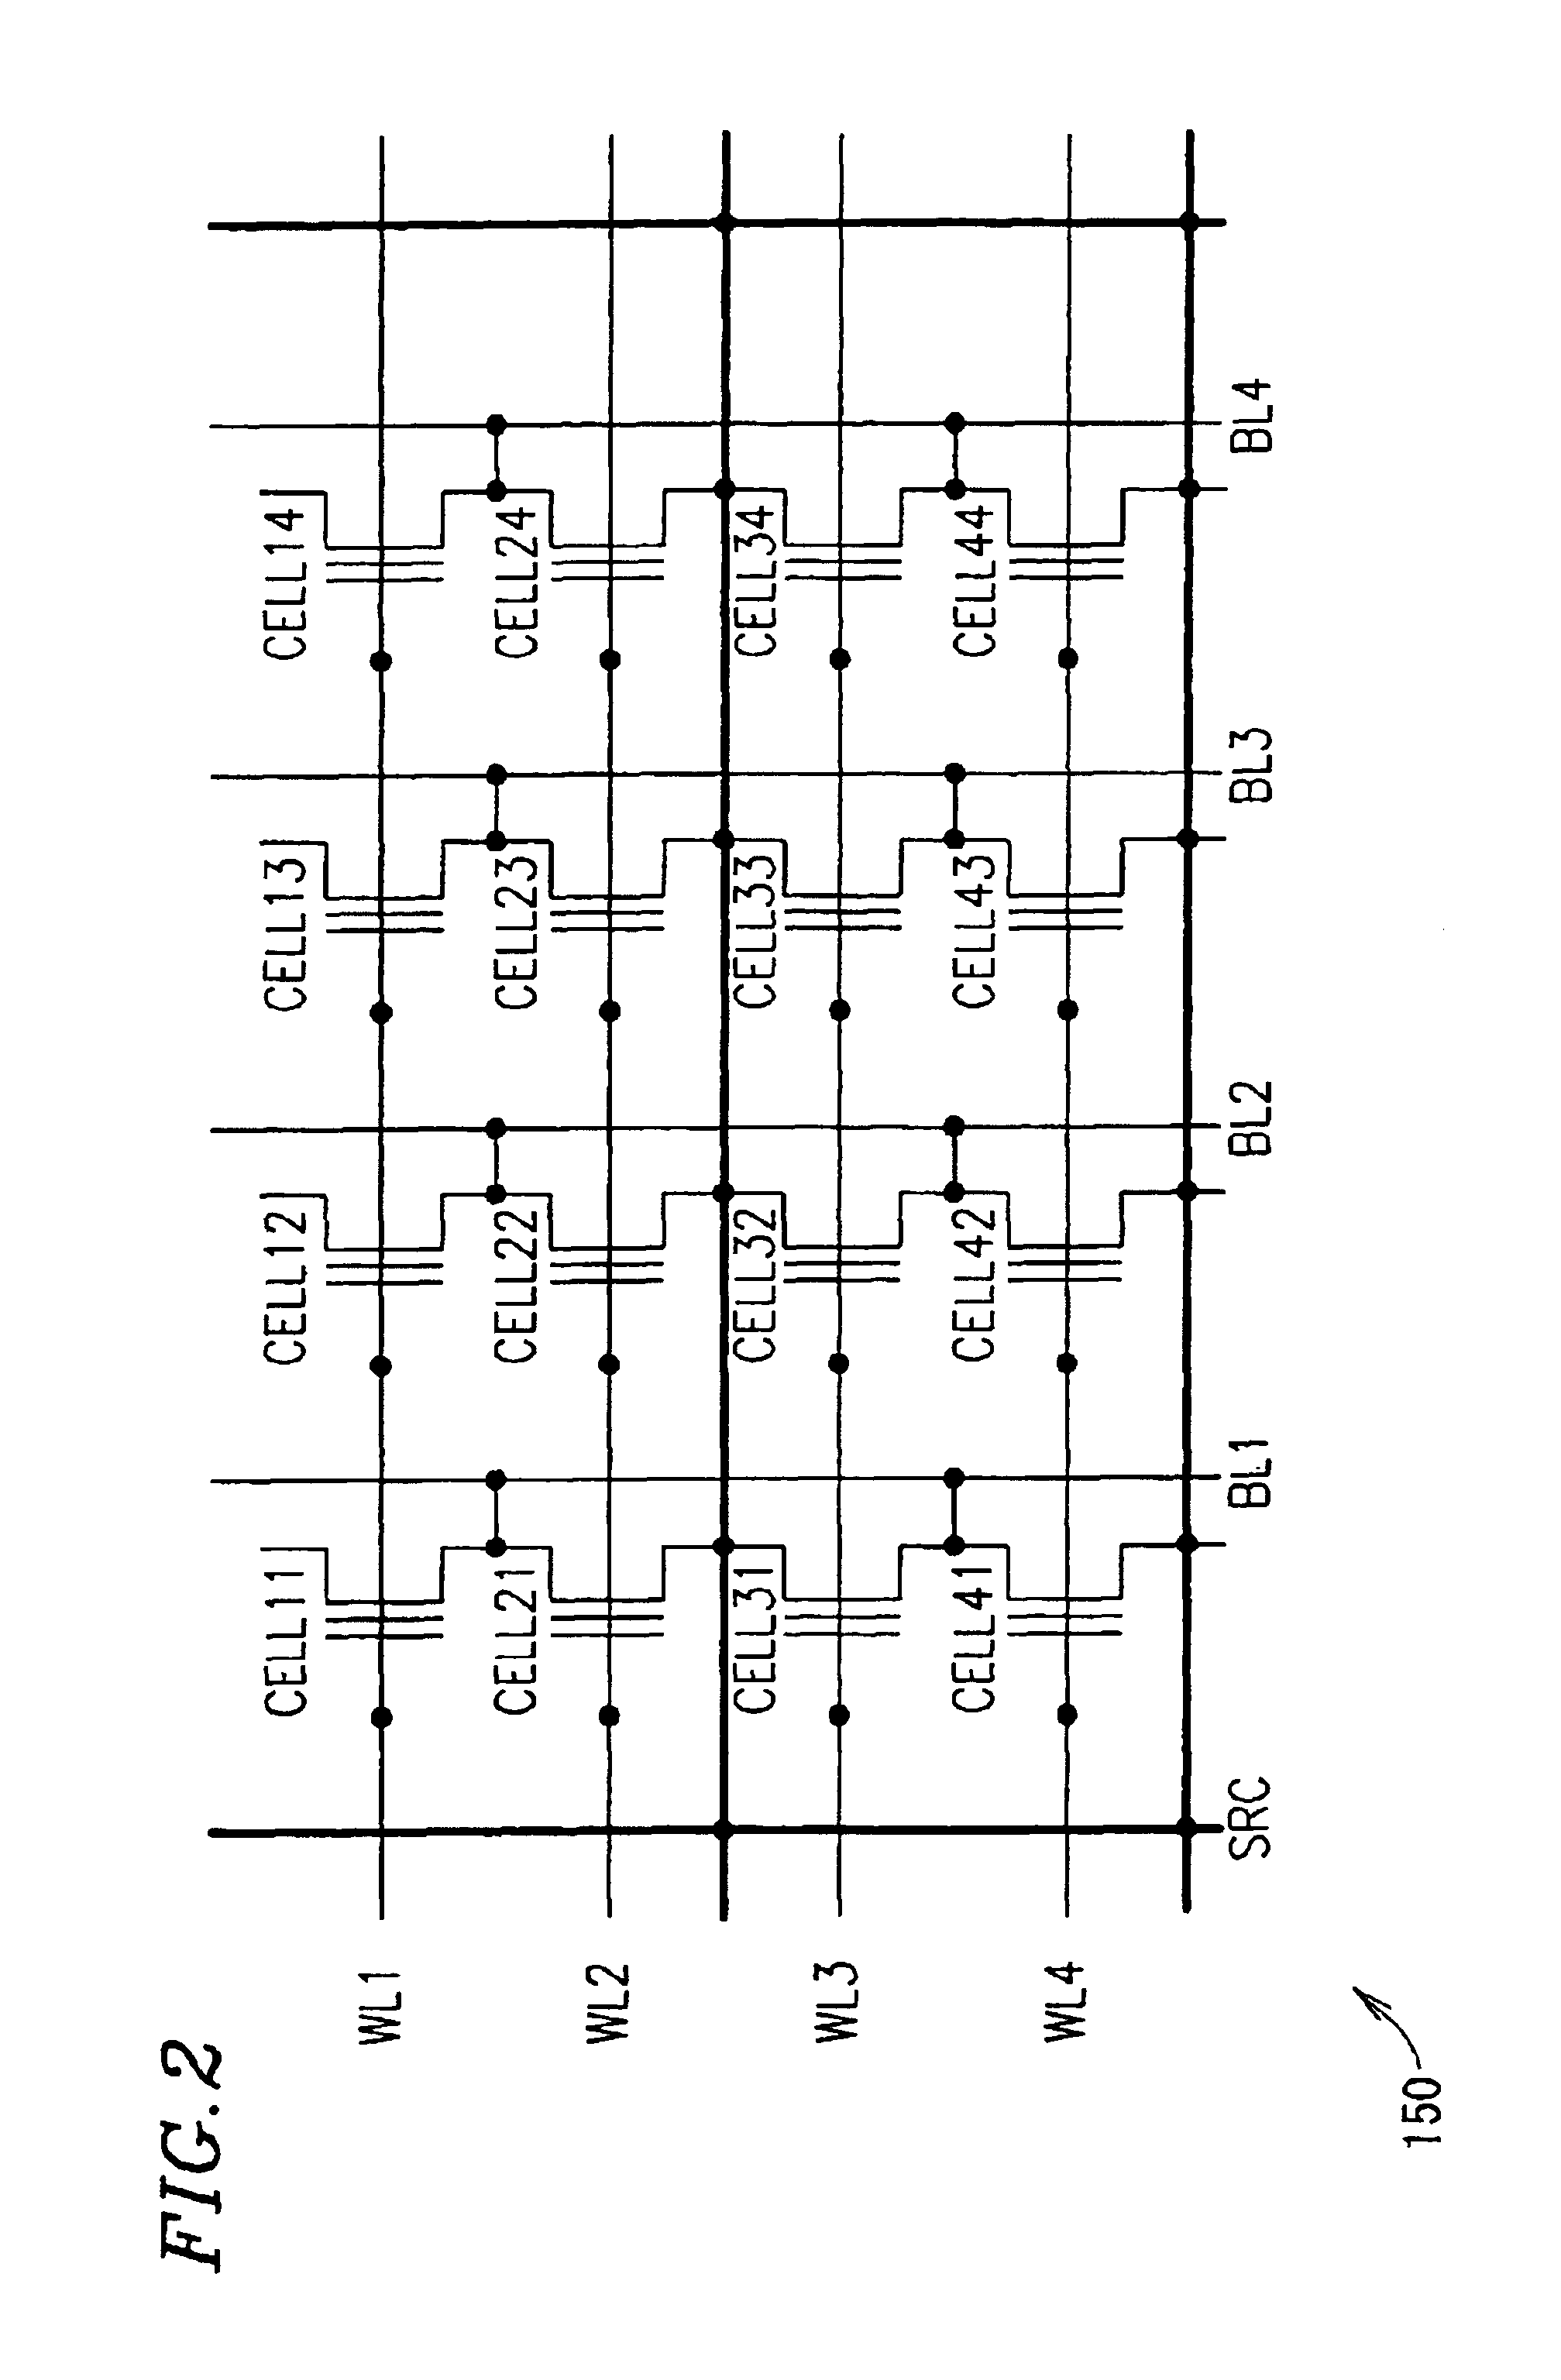 Reading circuit, reference circuit, and semiconductor memory device